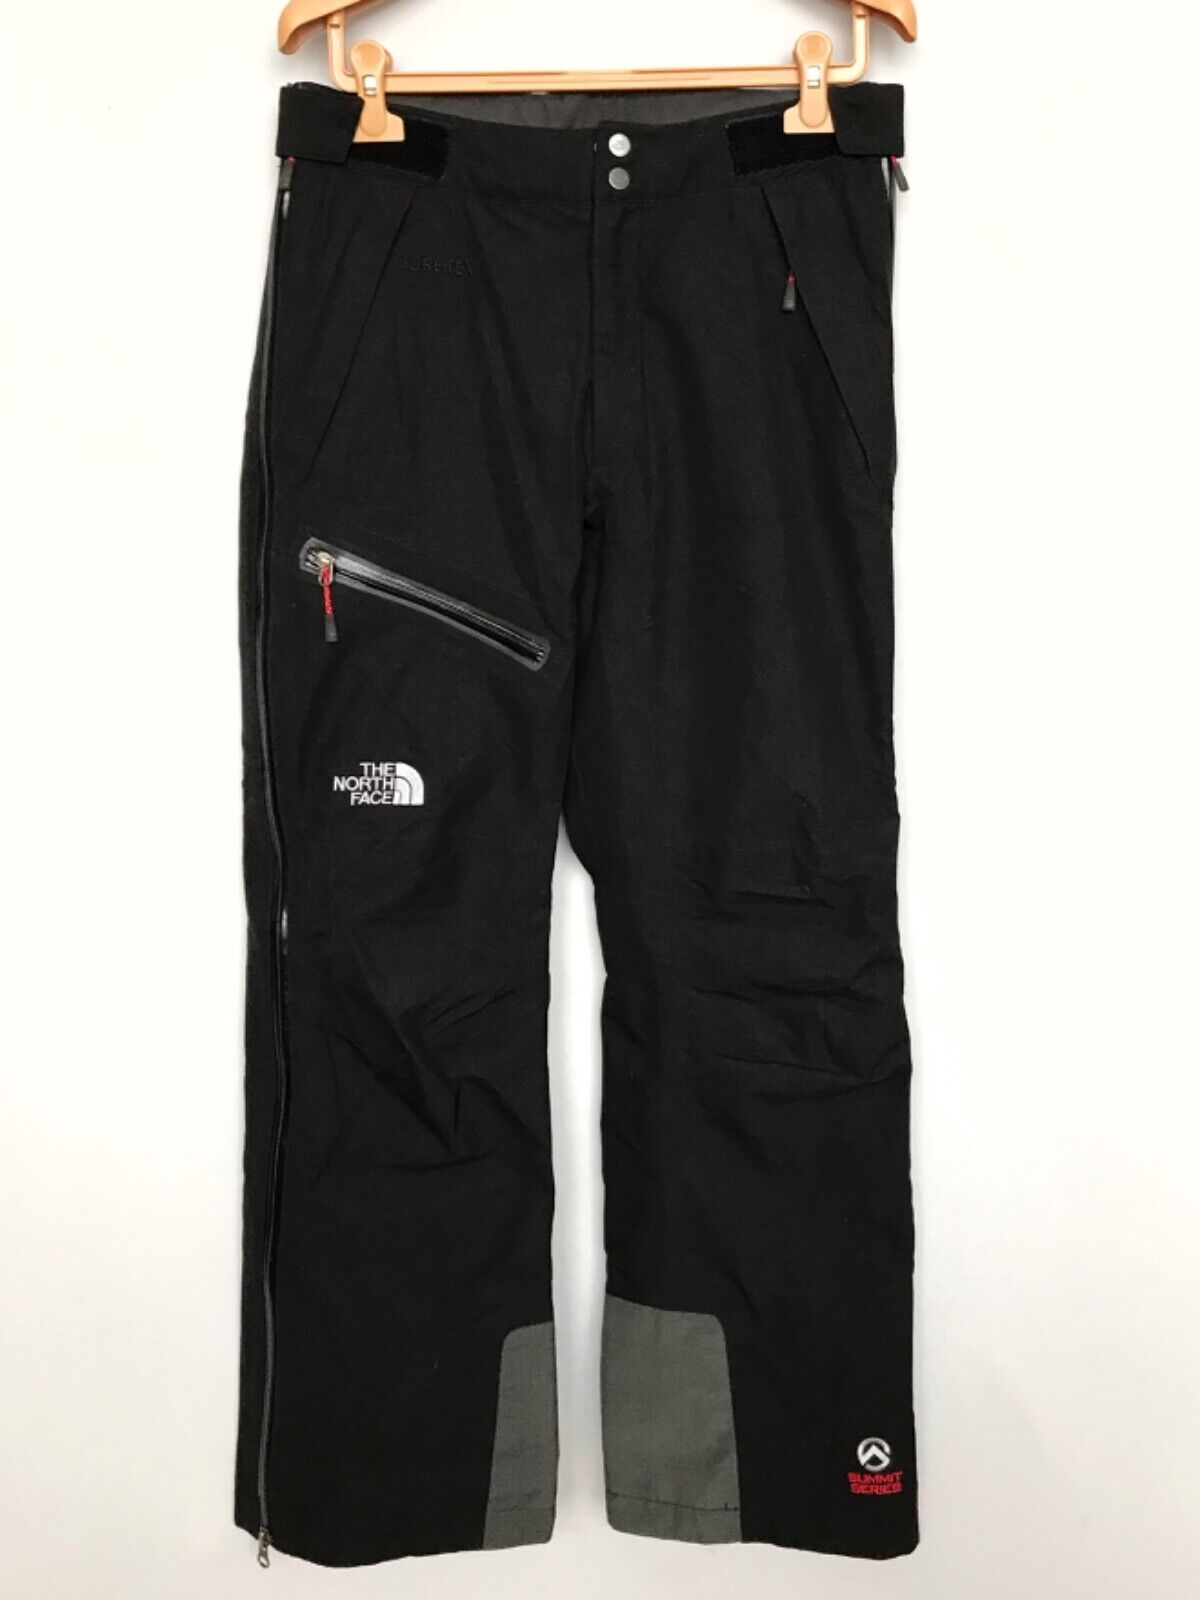 THE NORTH FACE SUMMIT SERIES GORE TEX PROFESSIONAL FULL ZIP WOMENS PANTS  SIZE S